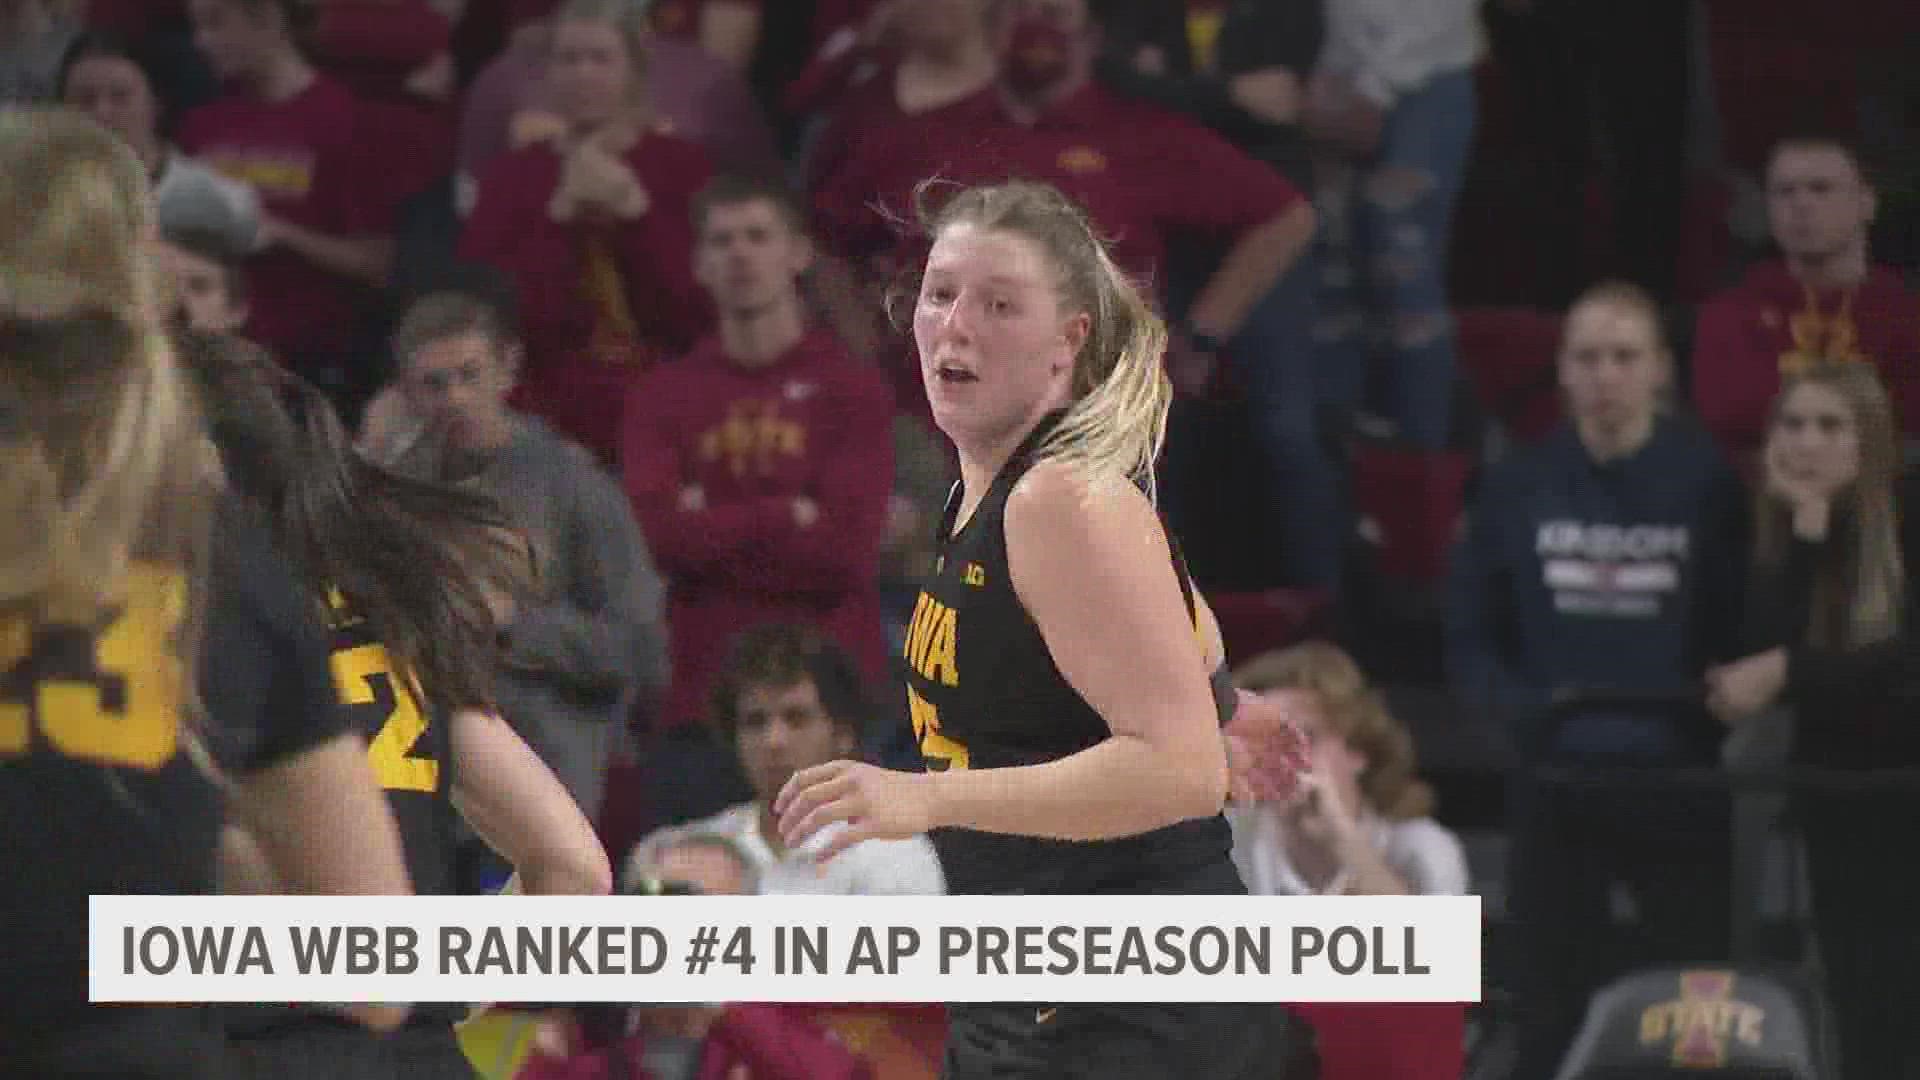 The Iowa women's basketball team came in at number four, their best ranking since 1994. The Hawkeyes were also picked to finish 1st in the Big 10.